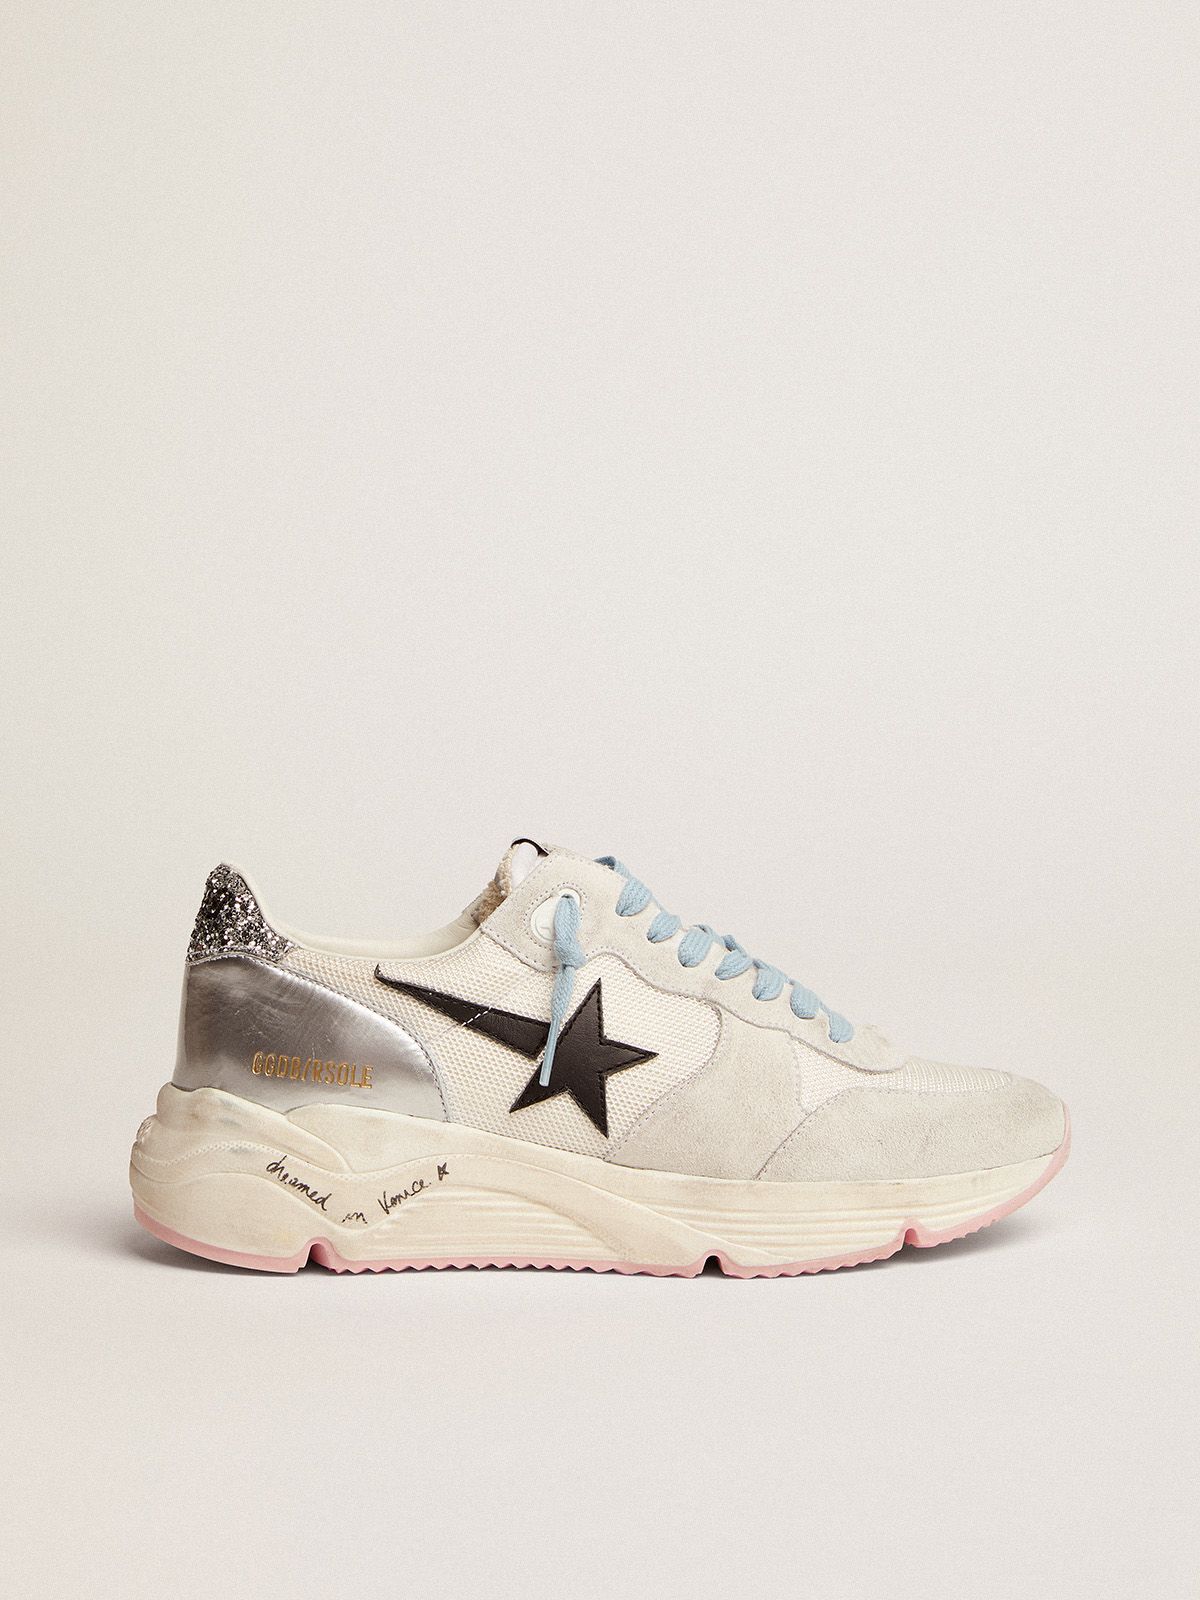 golden goose sneakers black glitter Sole and LTD suede star leather tab mesh in with silver heel Running white